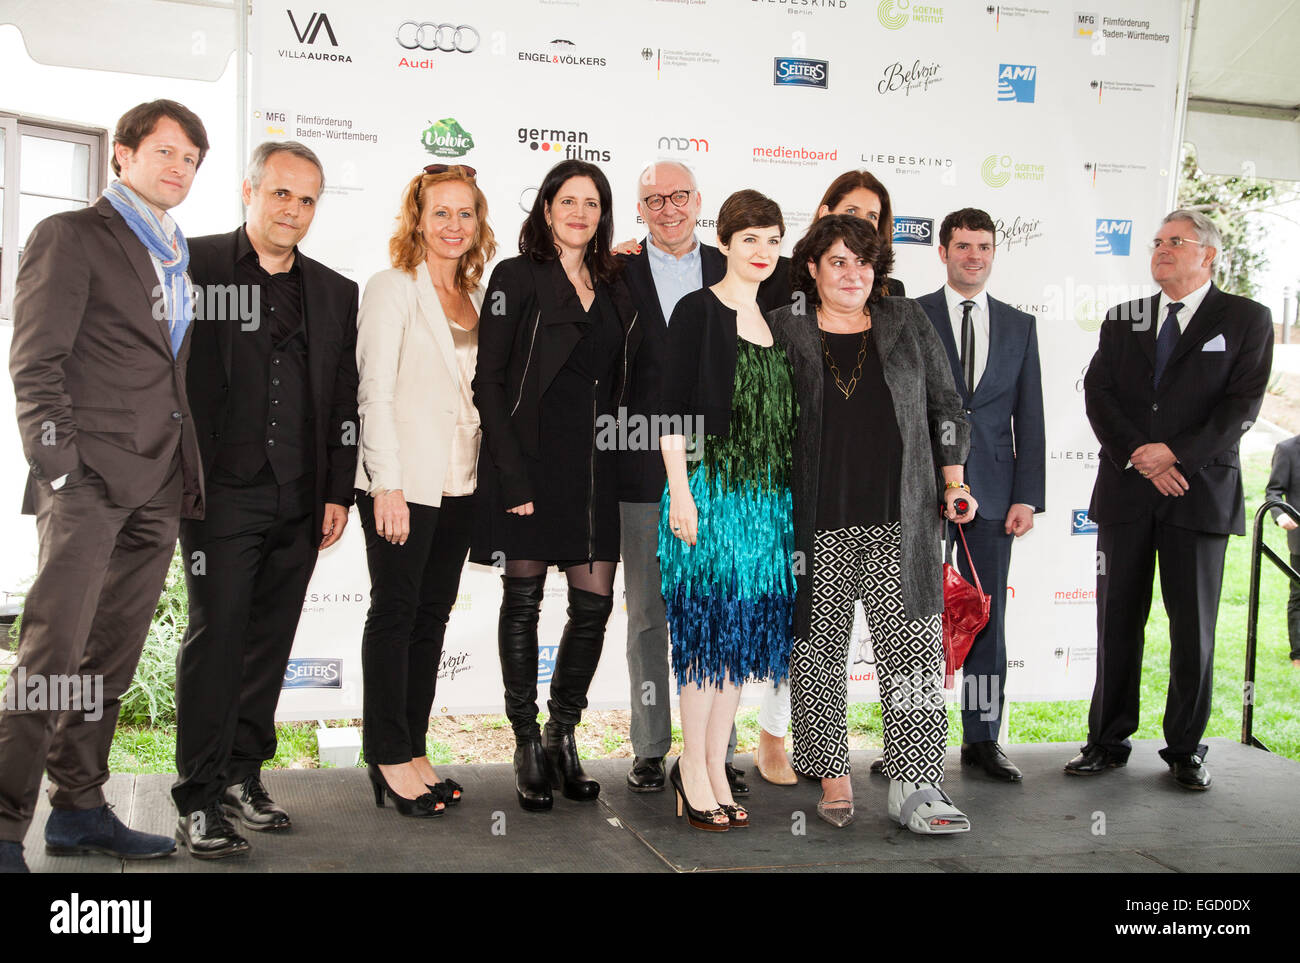 Crew of Citizenfour at the German Films and the Consulate General of the Federal Republic Of Germany's German Oscar nominees reception held at Villa Aurora in Pacific Palisades on February 21, 2015. Credit: Flaminia Fanale/Lumeimages.com Stock Photo